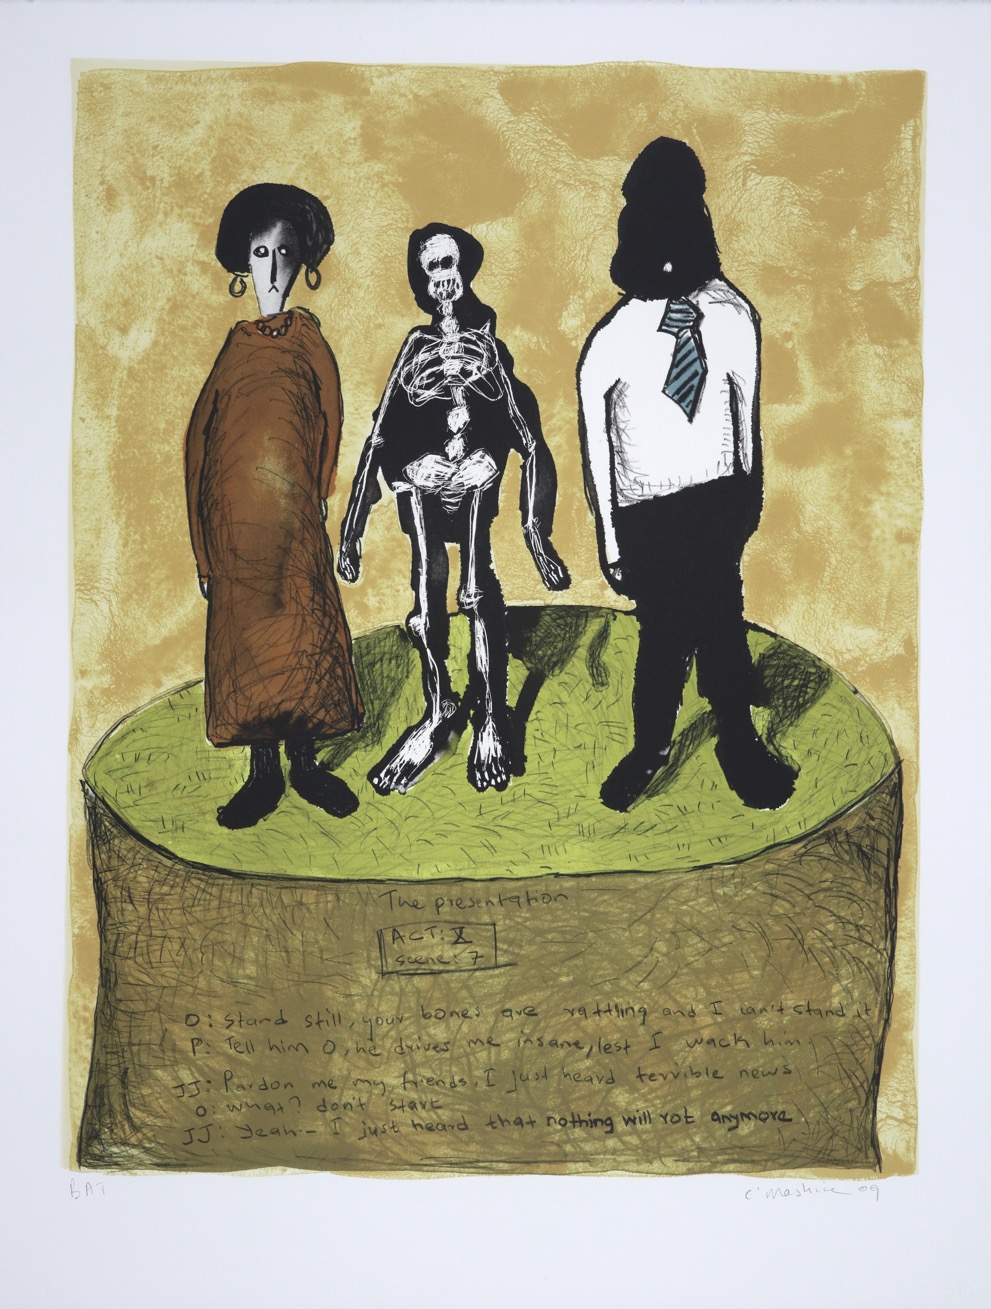 Three figures standing on a raised circular platform. The middle one is a skeleton.